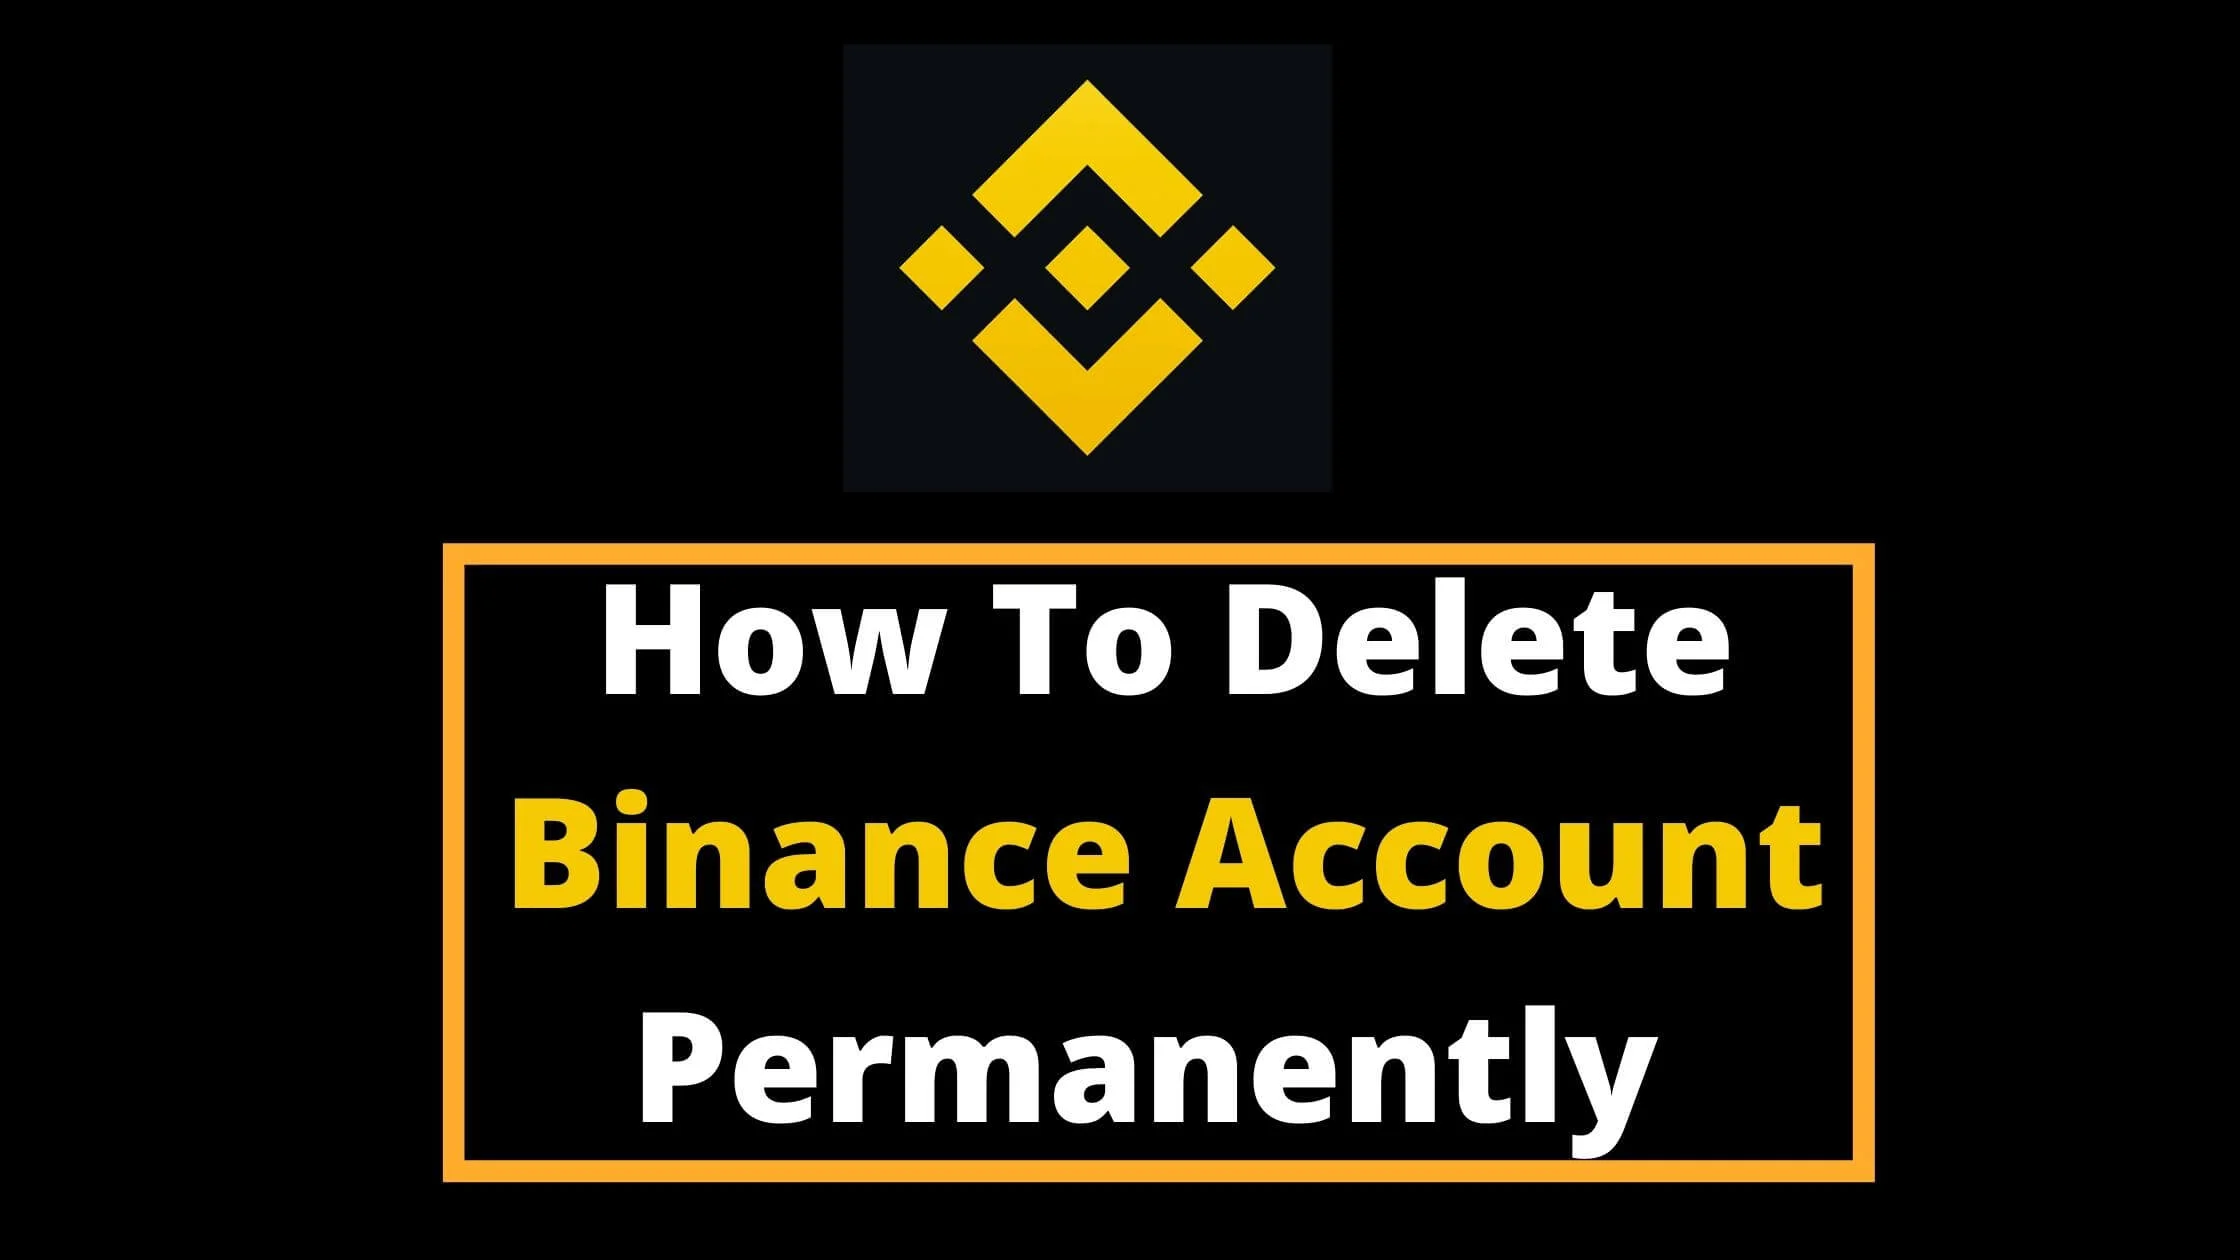 How To Delete Binance Account Permanently